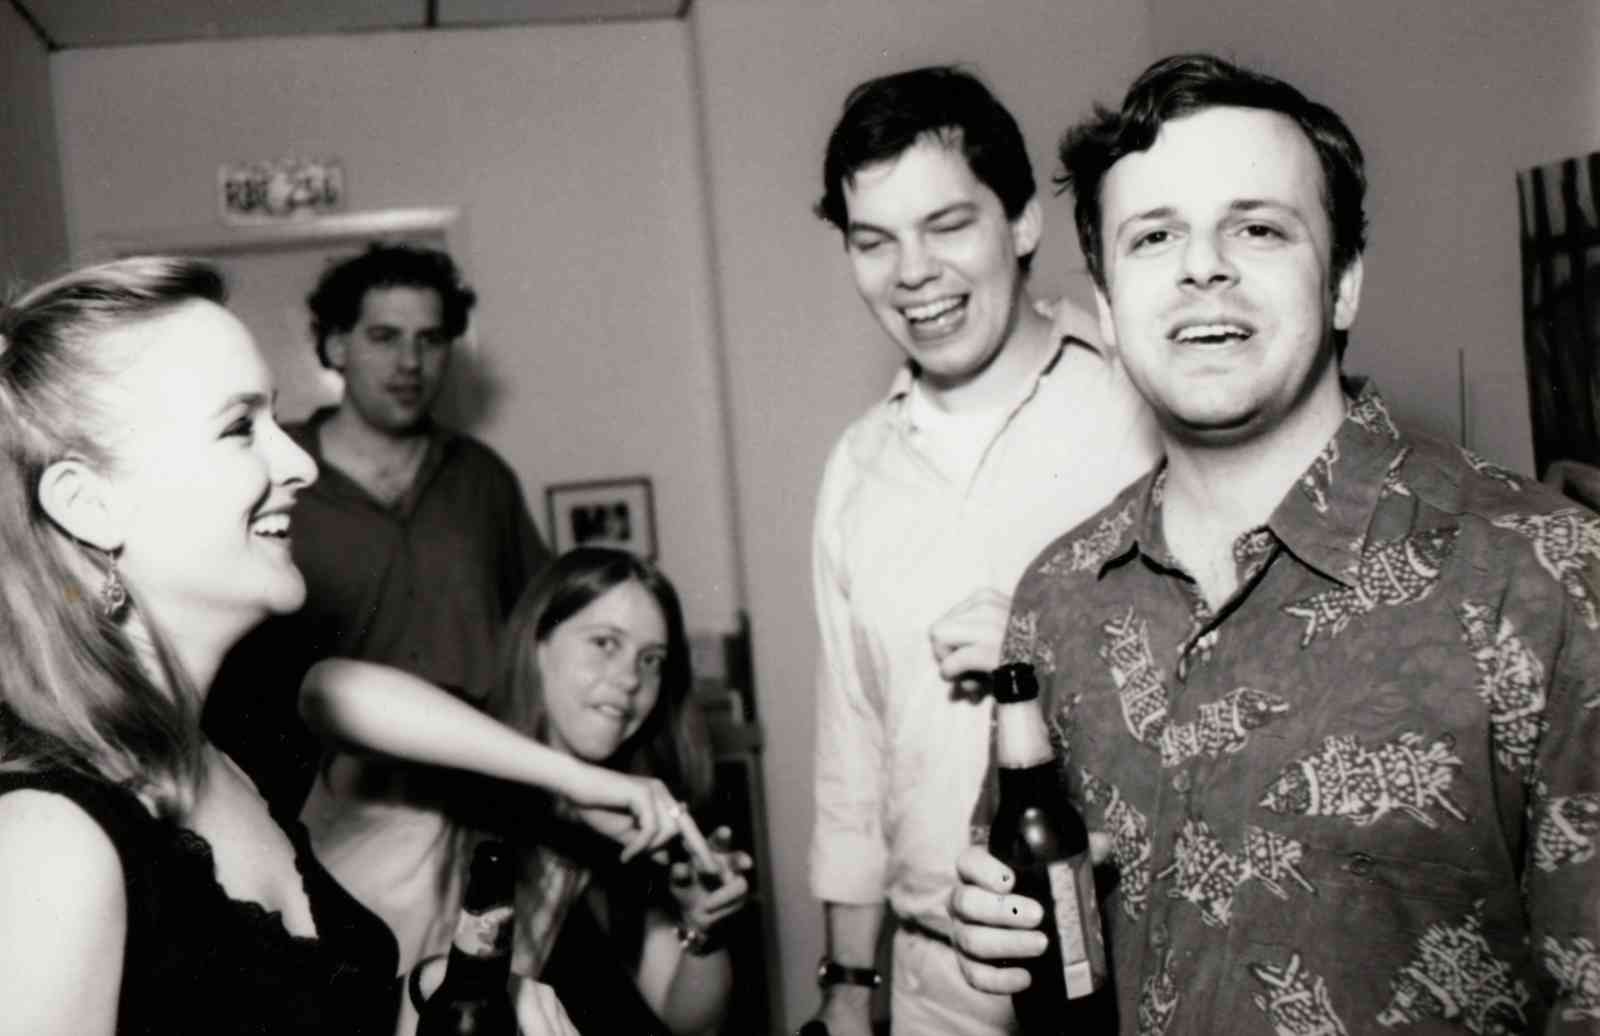 the gang at a party in the nineties